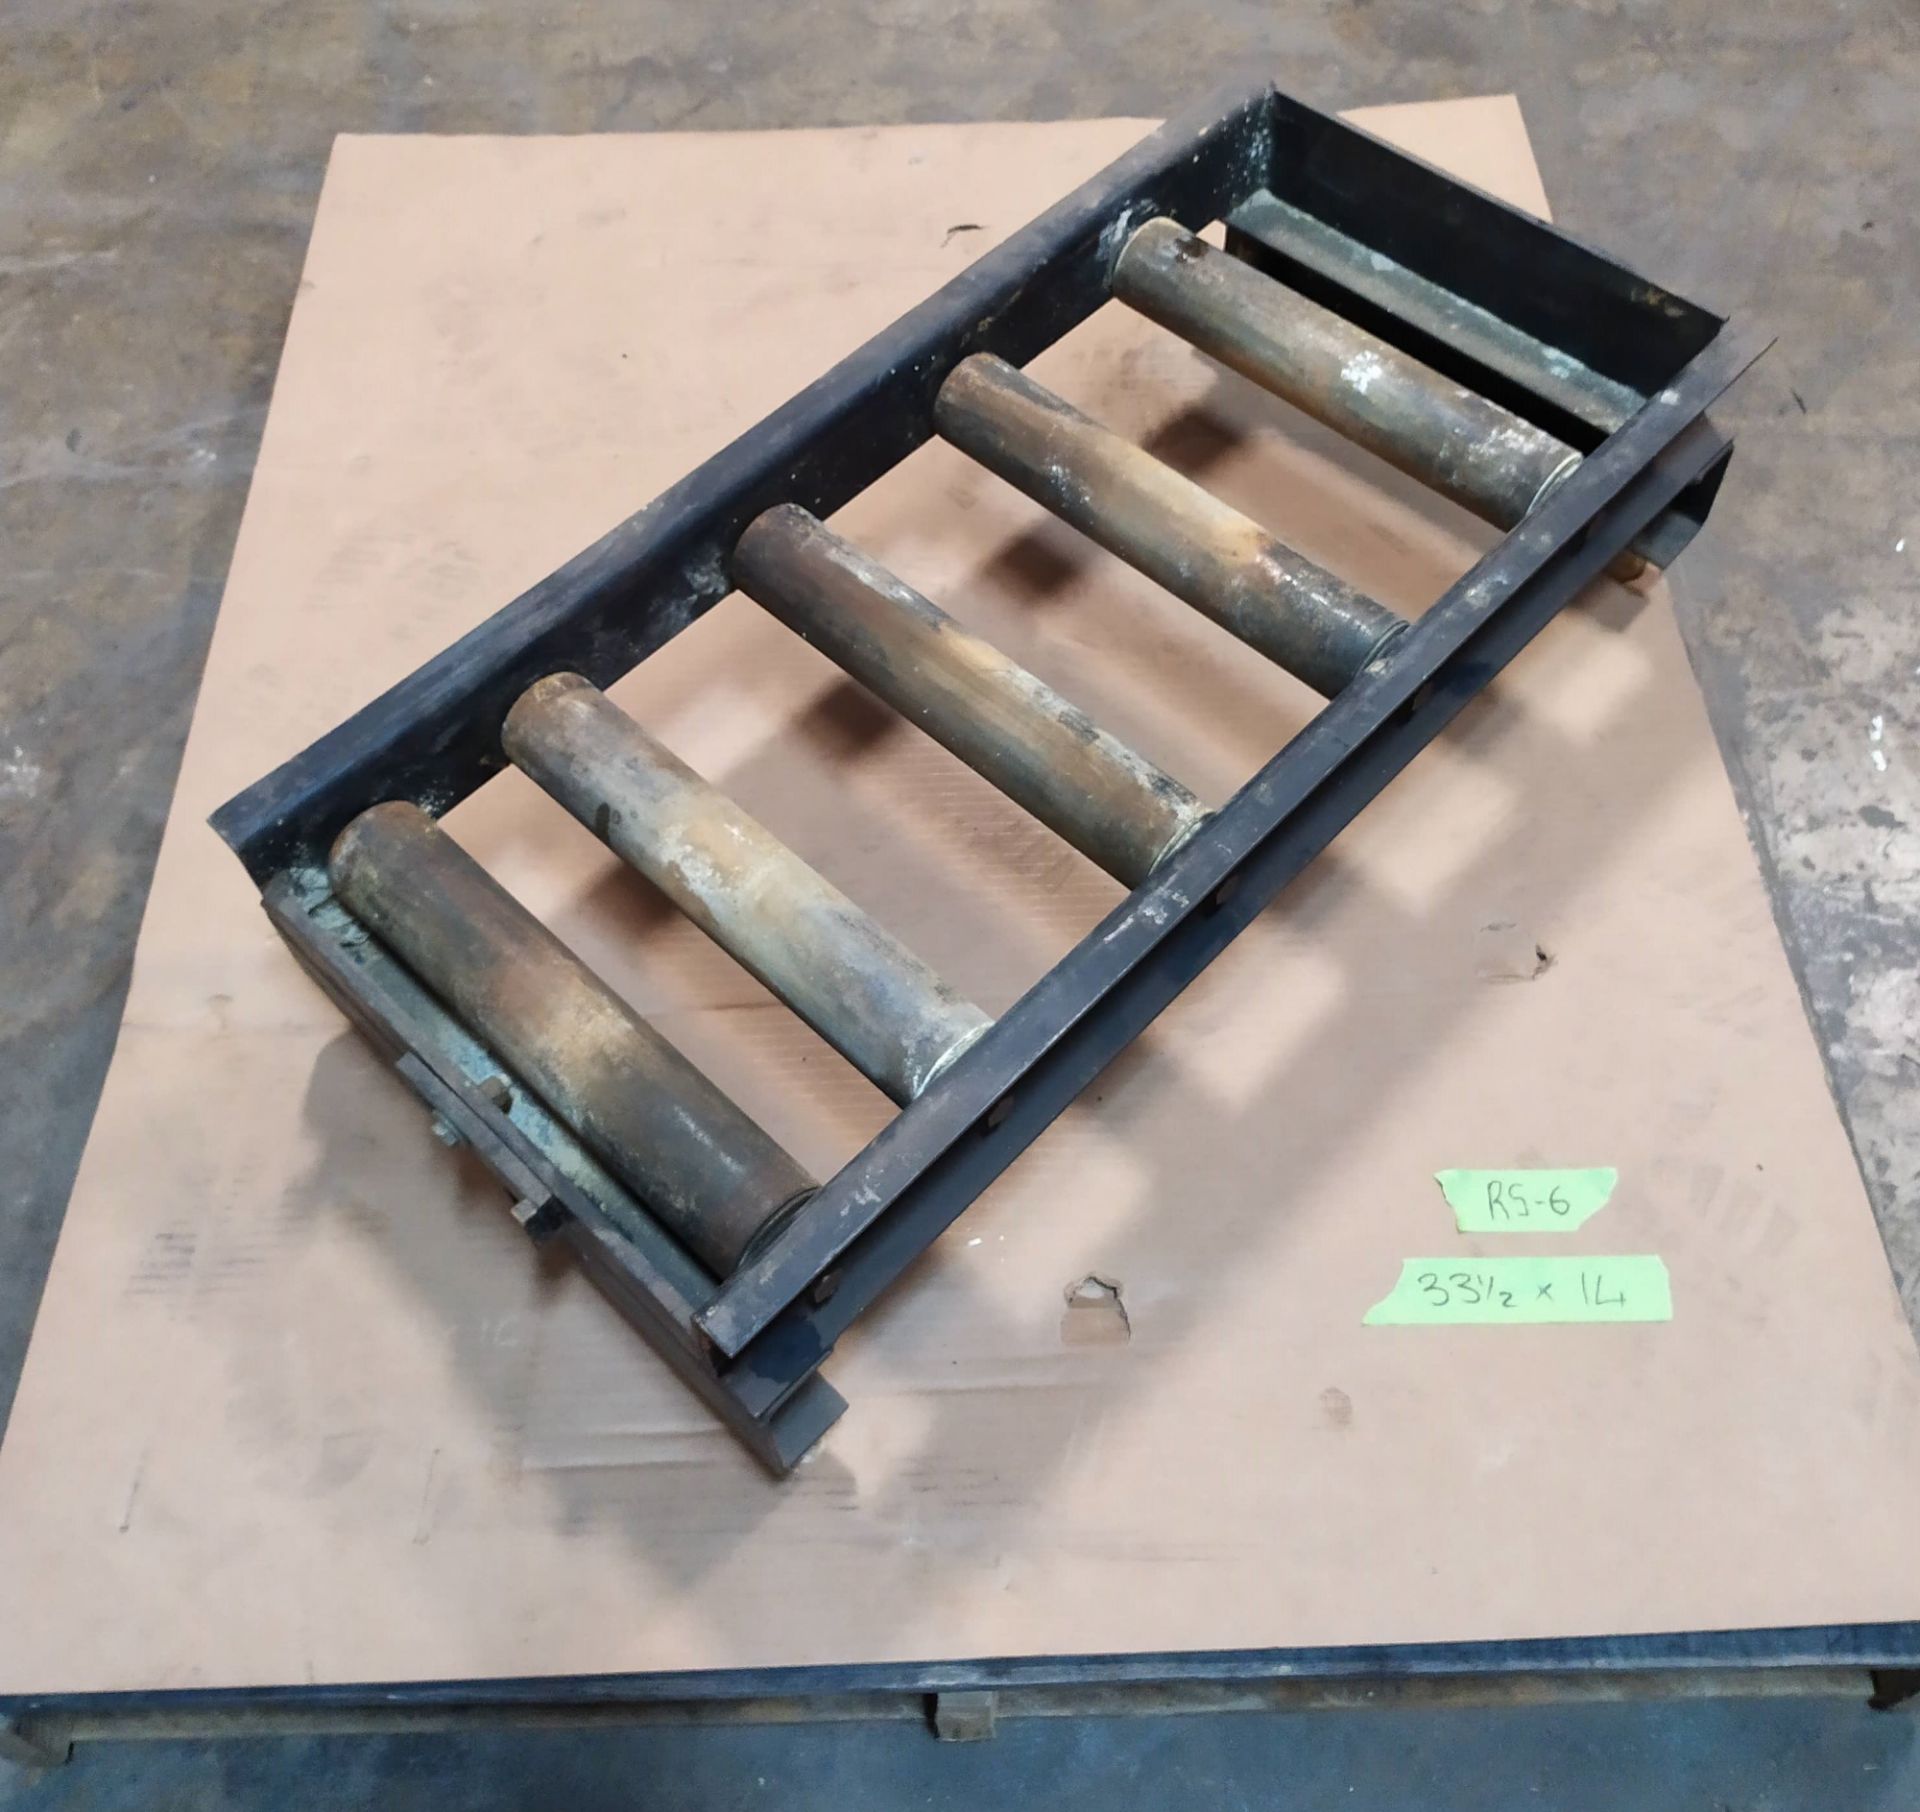 33.5"X14" BATTERY ROLLER STAND (UNIT RS-6)